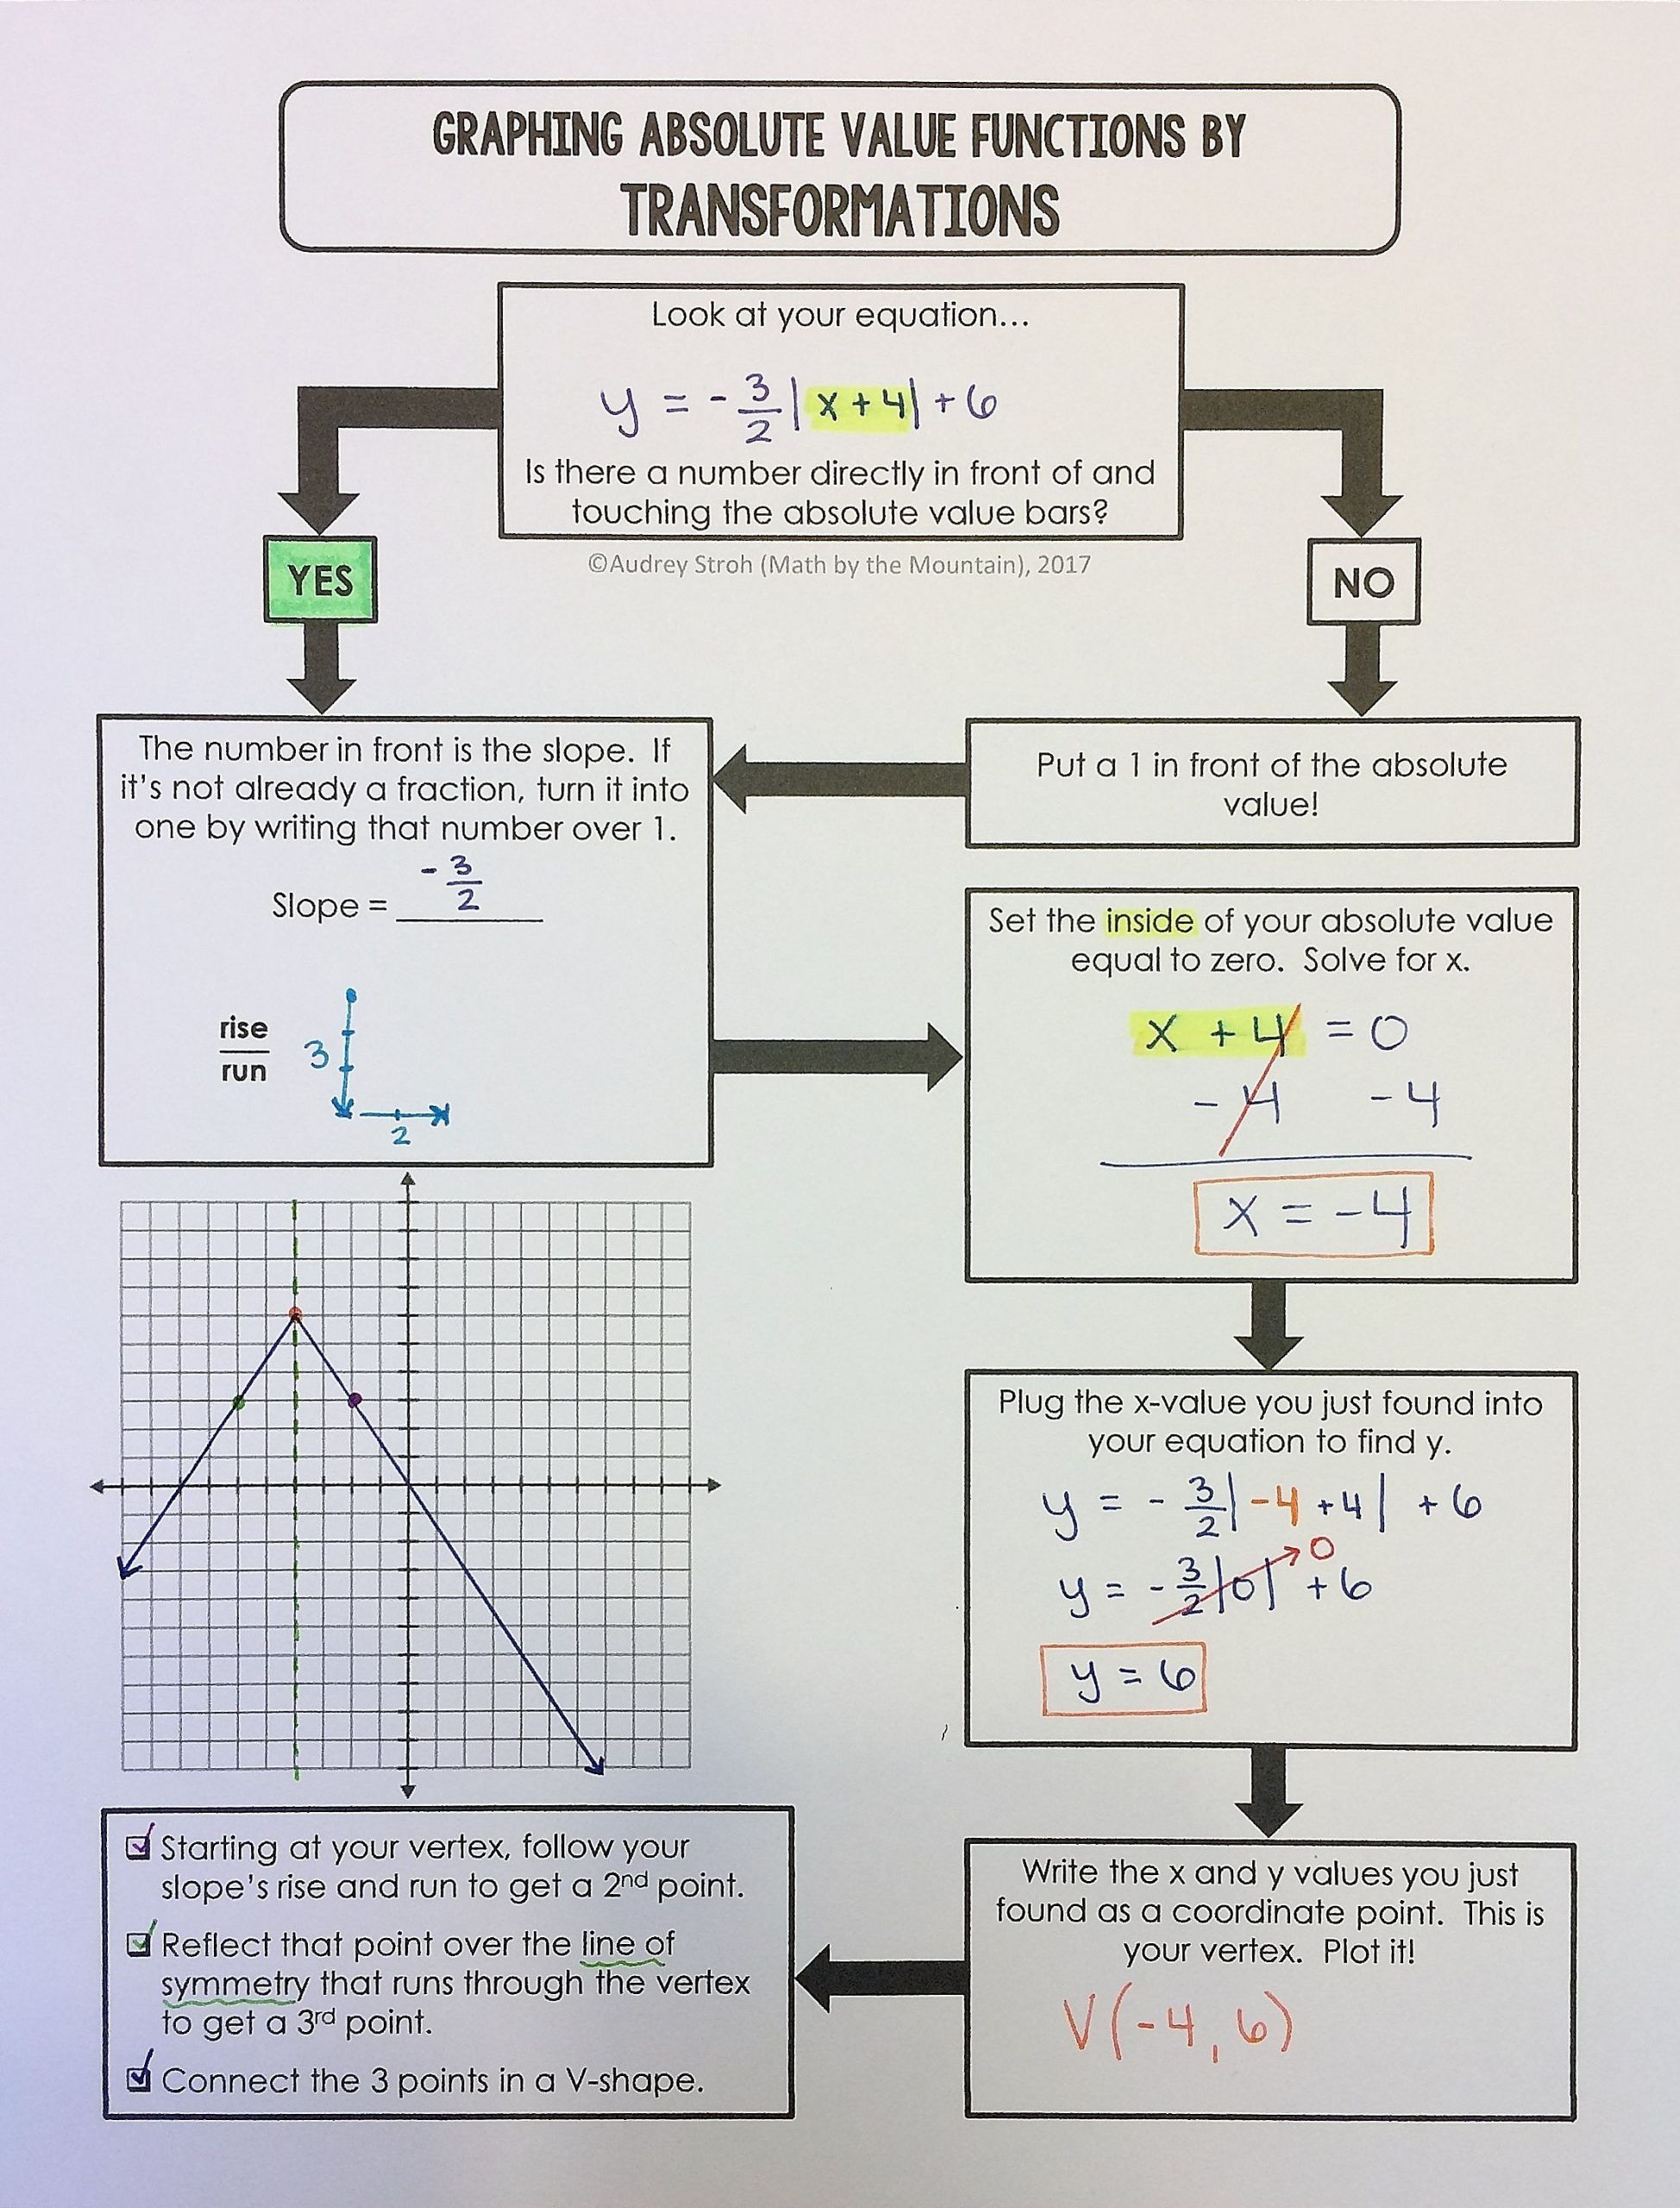 Graphing Absolute Value Functions Worksheet Graphing Absolute Value Functions Flowchart Graphic